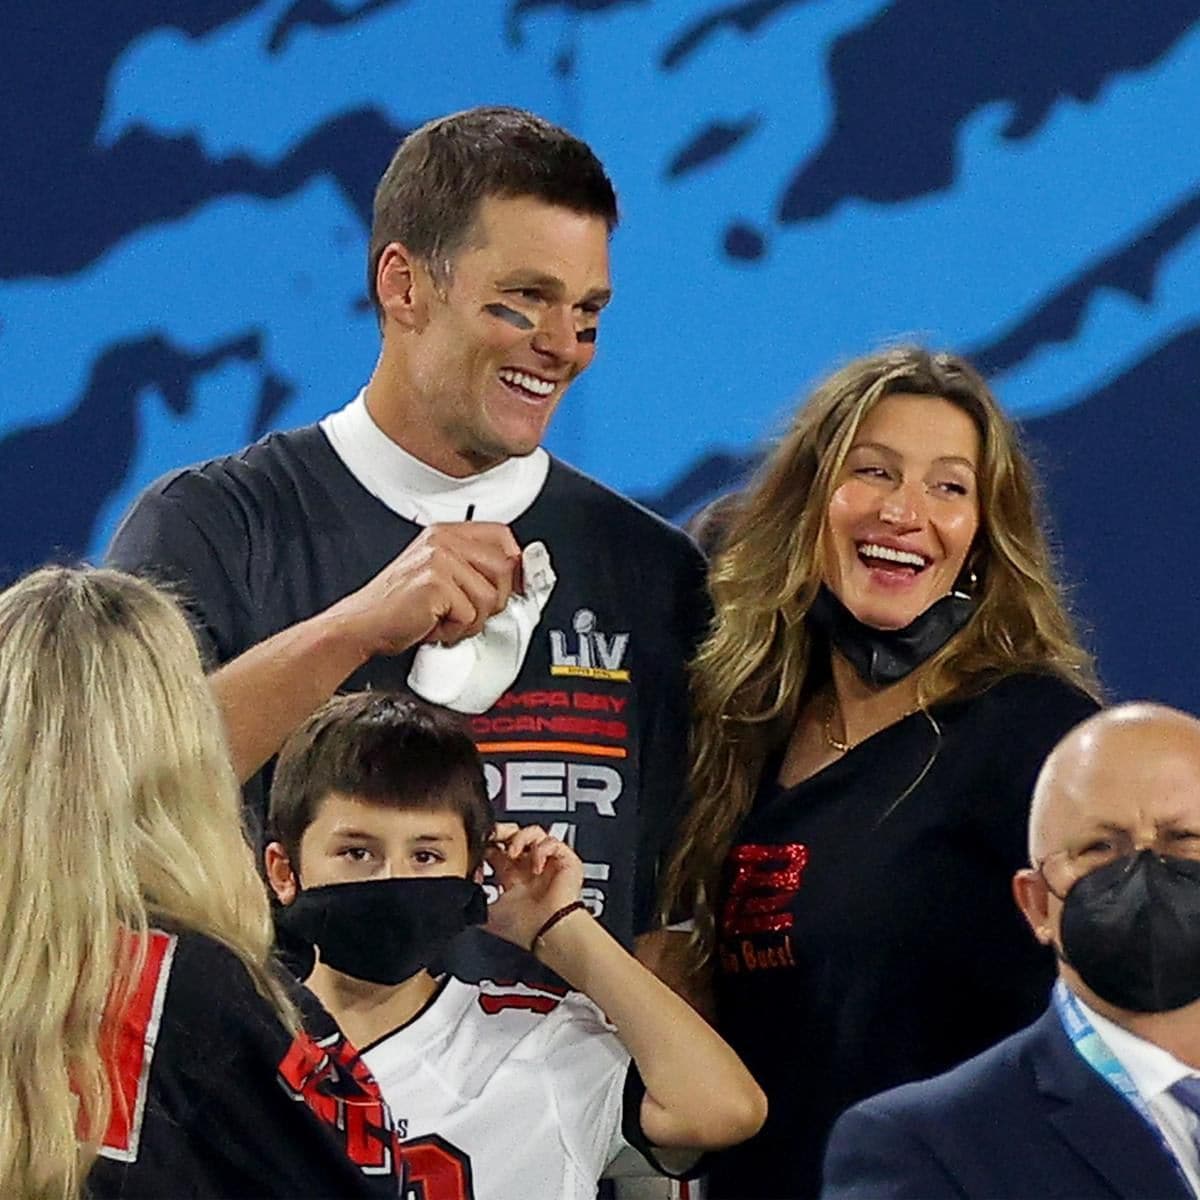 Gisele, who split from Tom in 2022, commented on her ex husband’s announcement: “Wishing you only wonderful things in this new chapter of your life.”